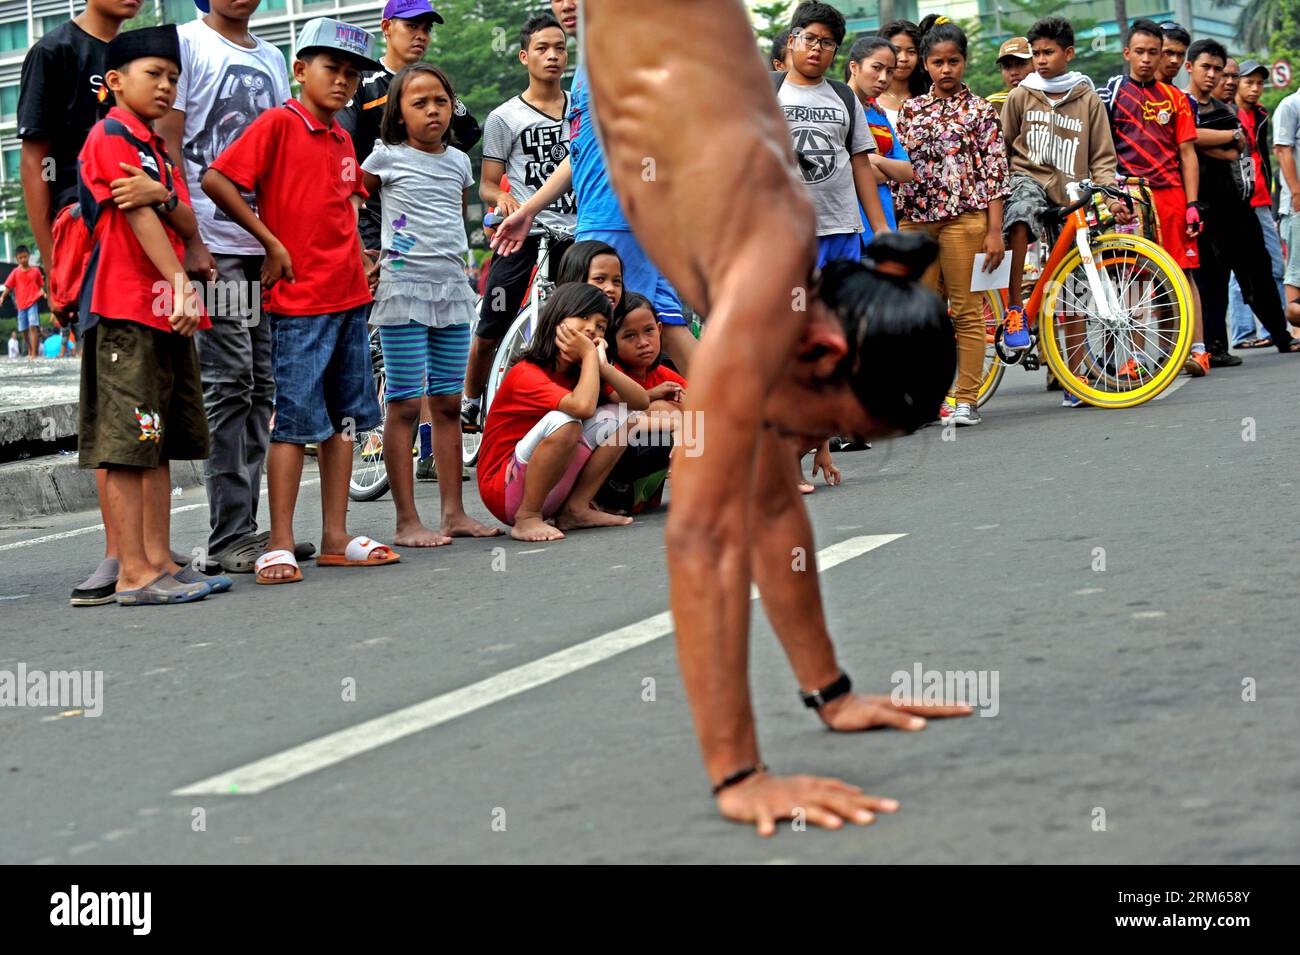 Bildnummer: 60806603  Datum: 08.12.2013  Copyright: imago/Xinhua     Children watch a man from Indonesian Jumper community do handstand of parkour and free run during the car free day in Jakarta, Indonesia, Dec. 8, 2013. (Xinhua/Agung Kuncahya B.) INDONESIA-JAKARTA-CAR FREE DAY PUBLICATIONxNOTxINxCHN xcb x0x 2013 quer Stock Photo